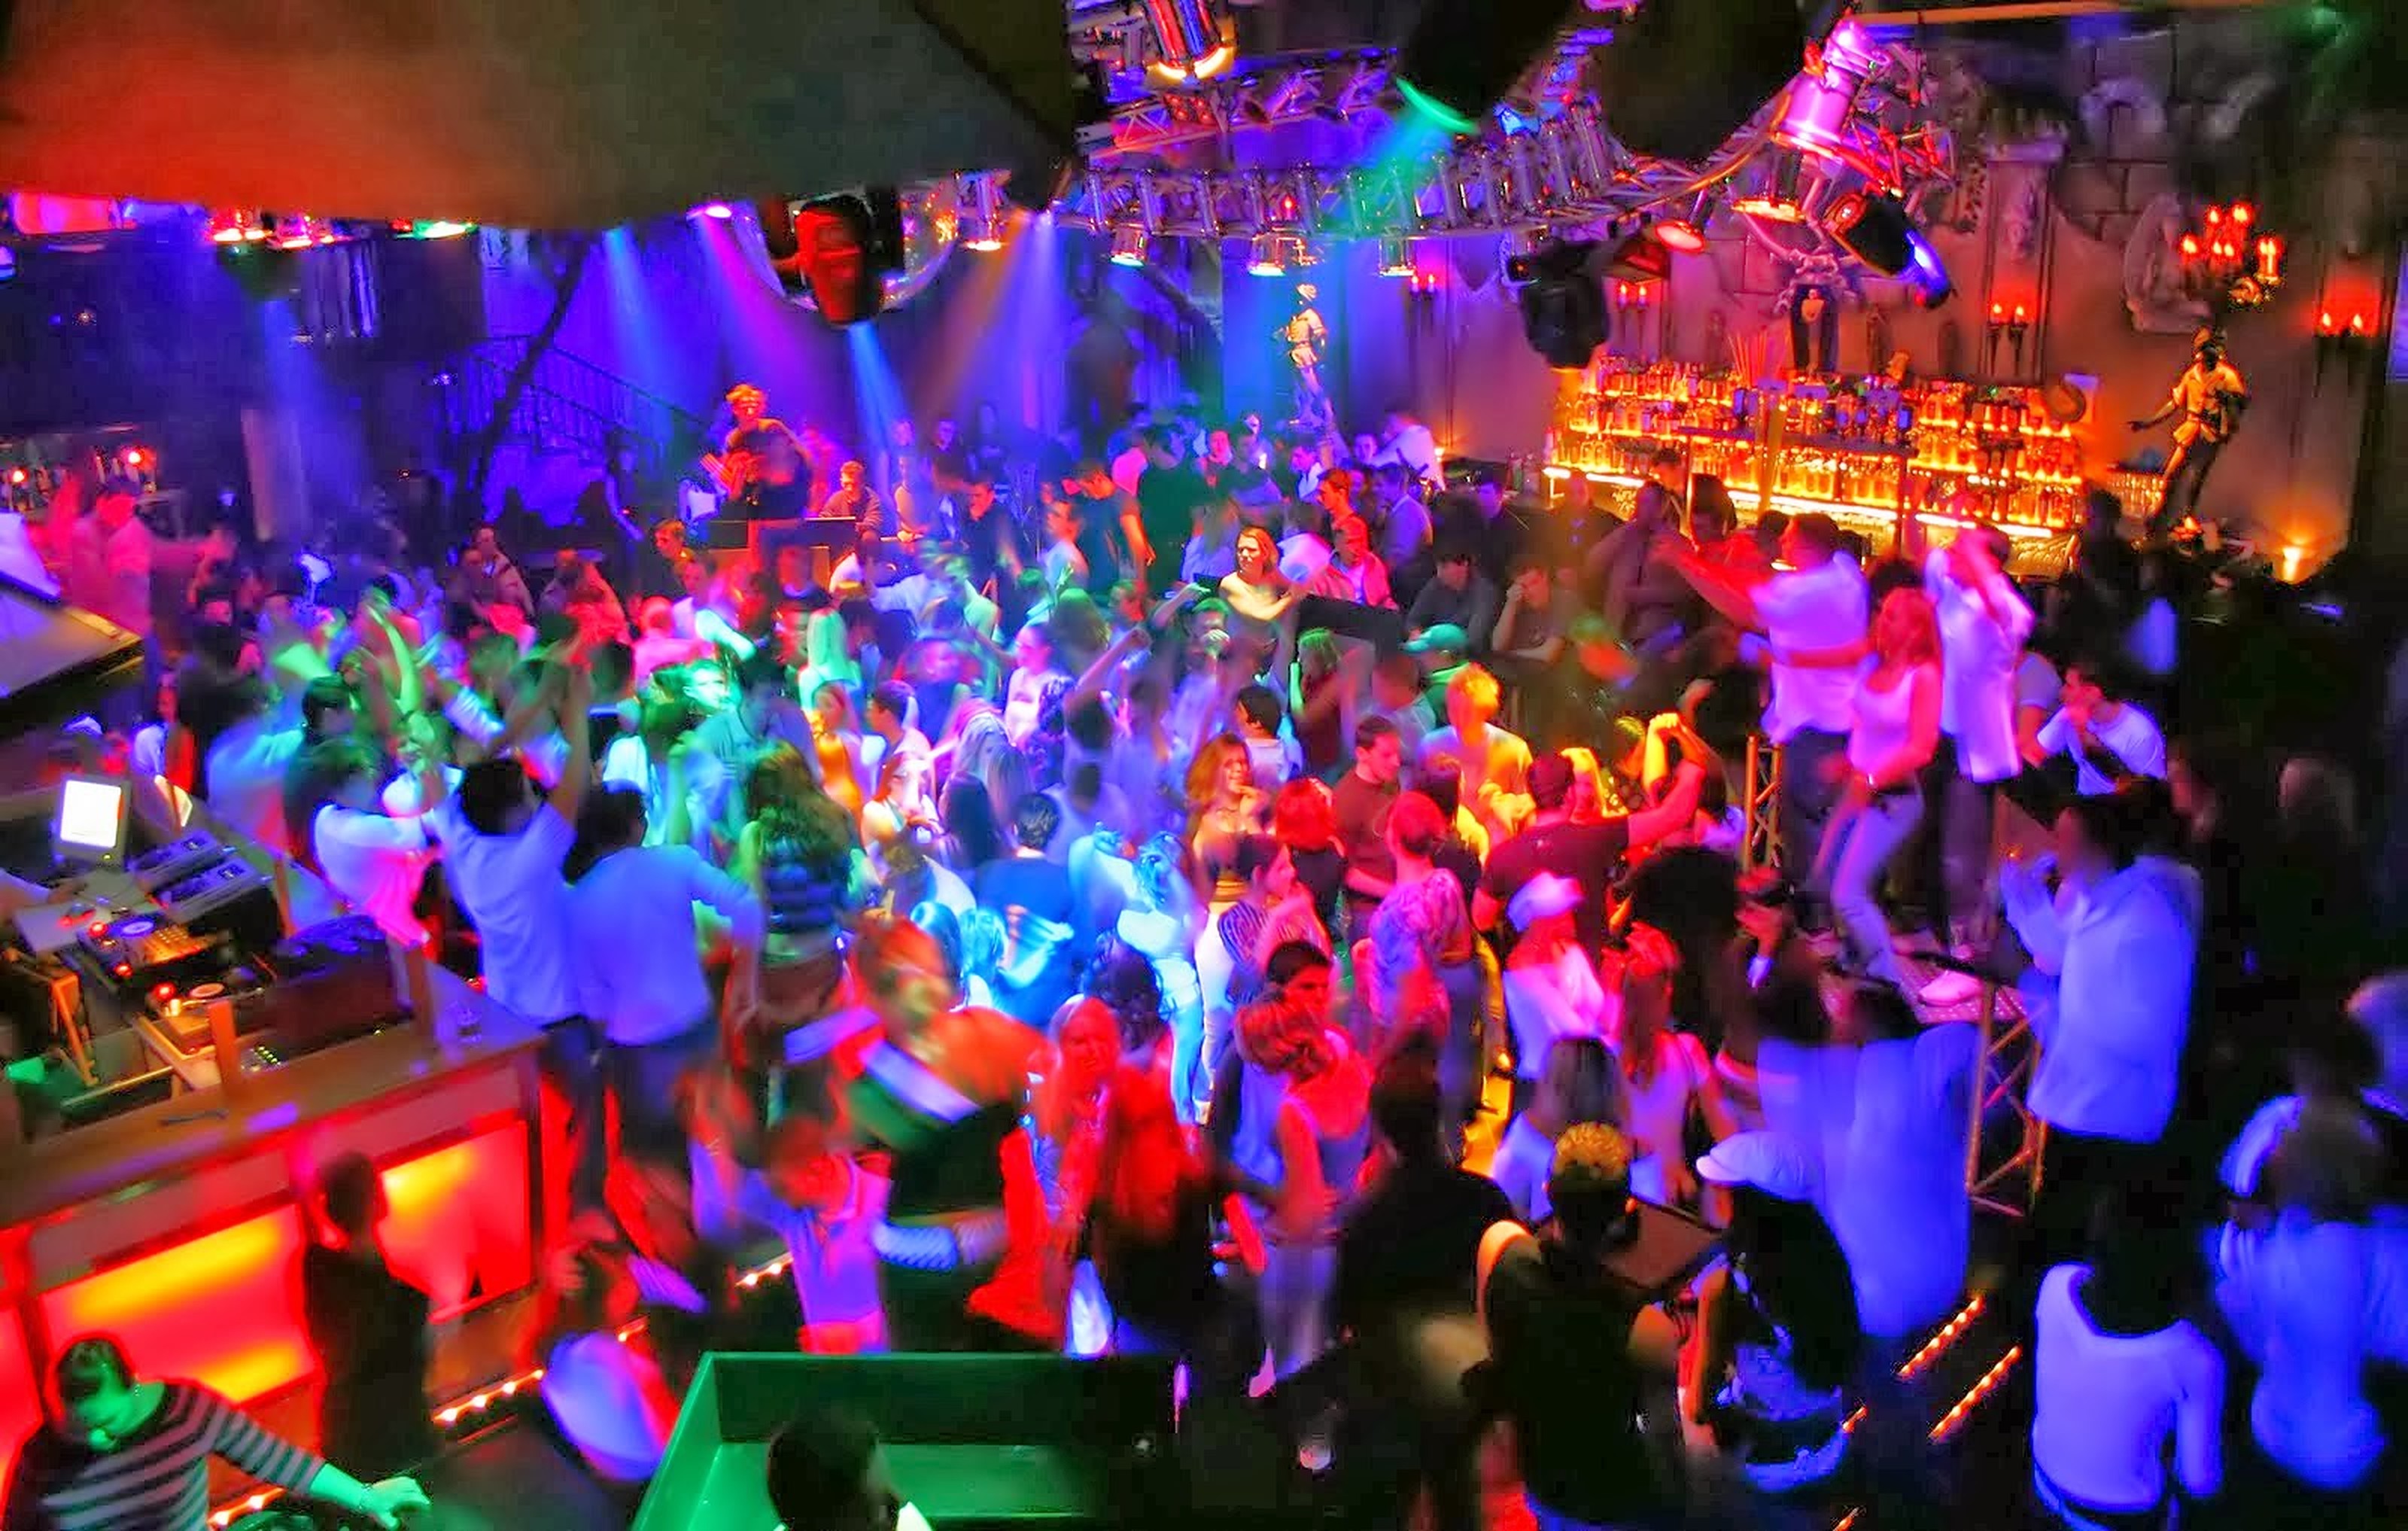 Titos Goa: the most famous and popular nightclub in Goa